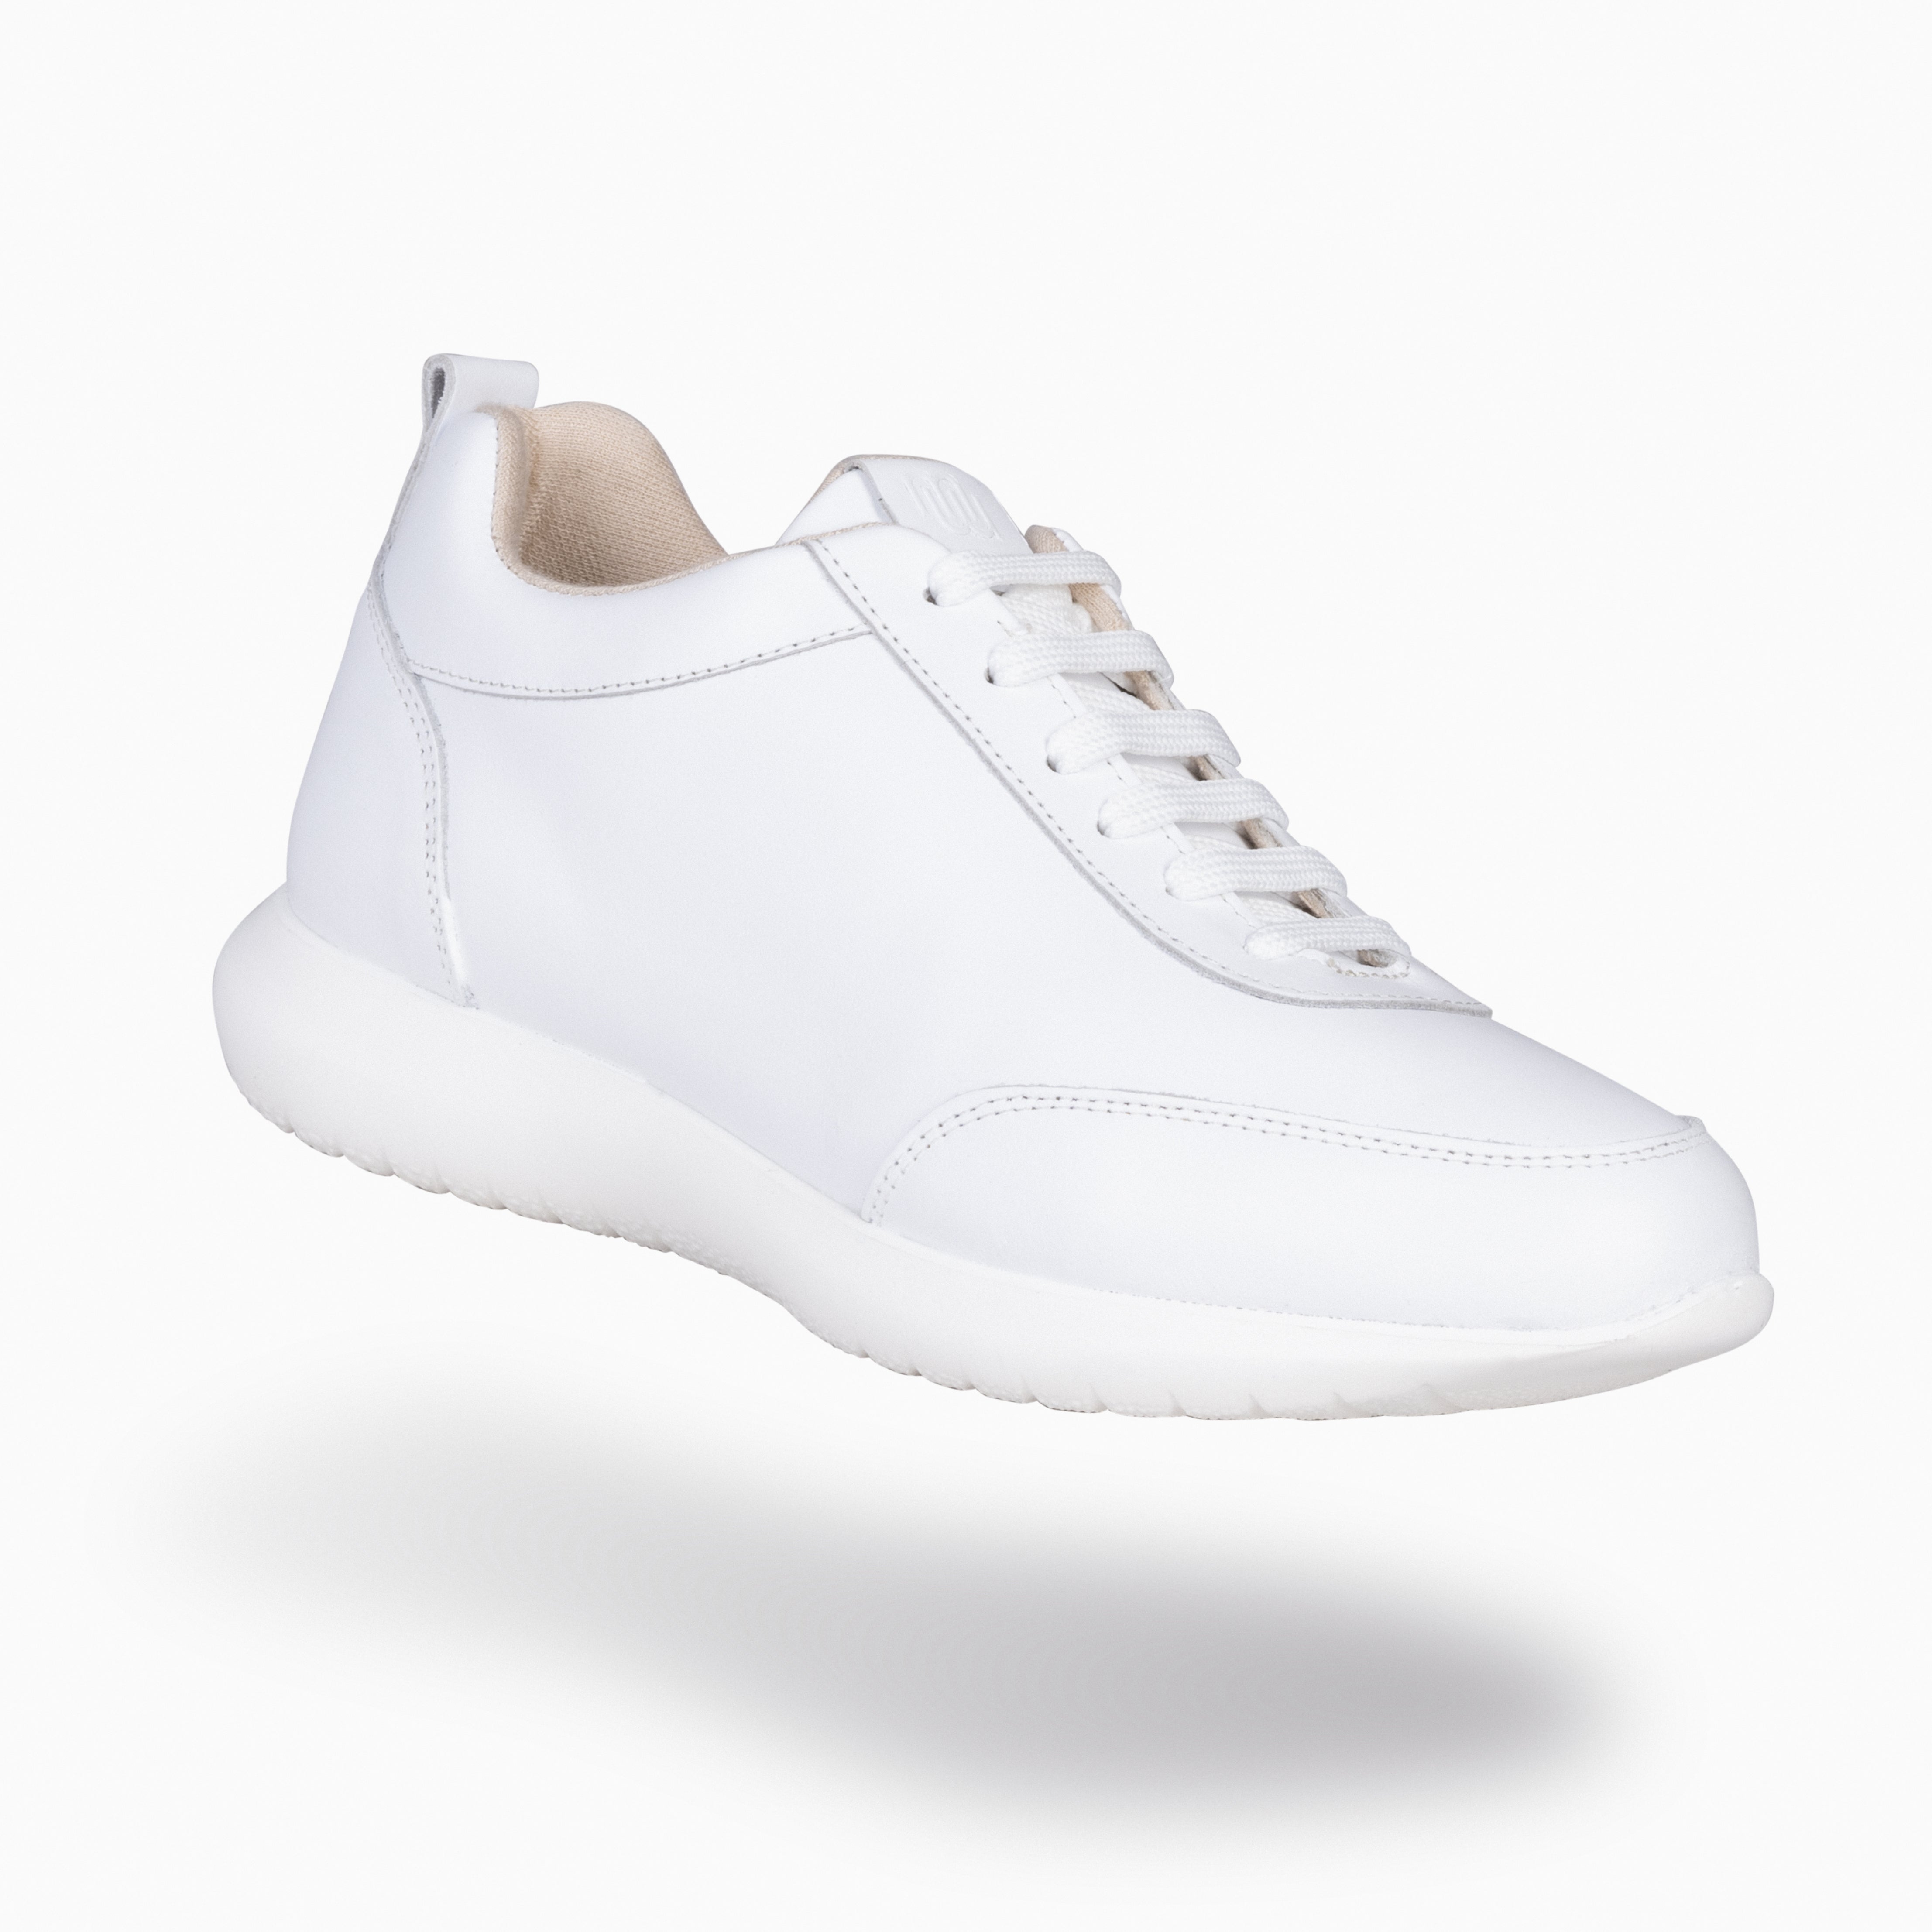 VENICE - WHITE Napa Sneakers with Removable Insole 